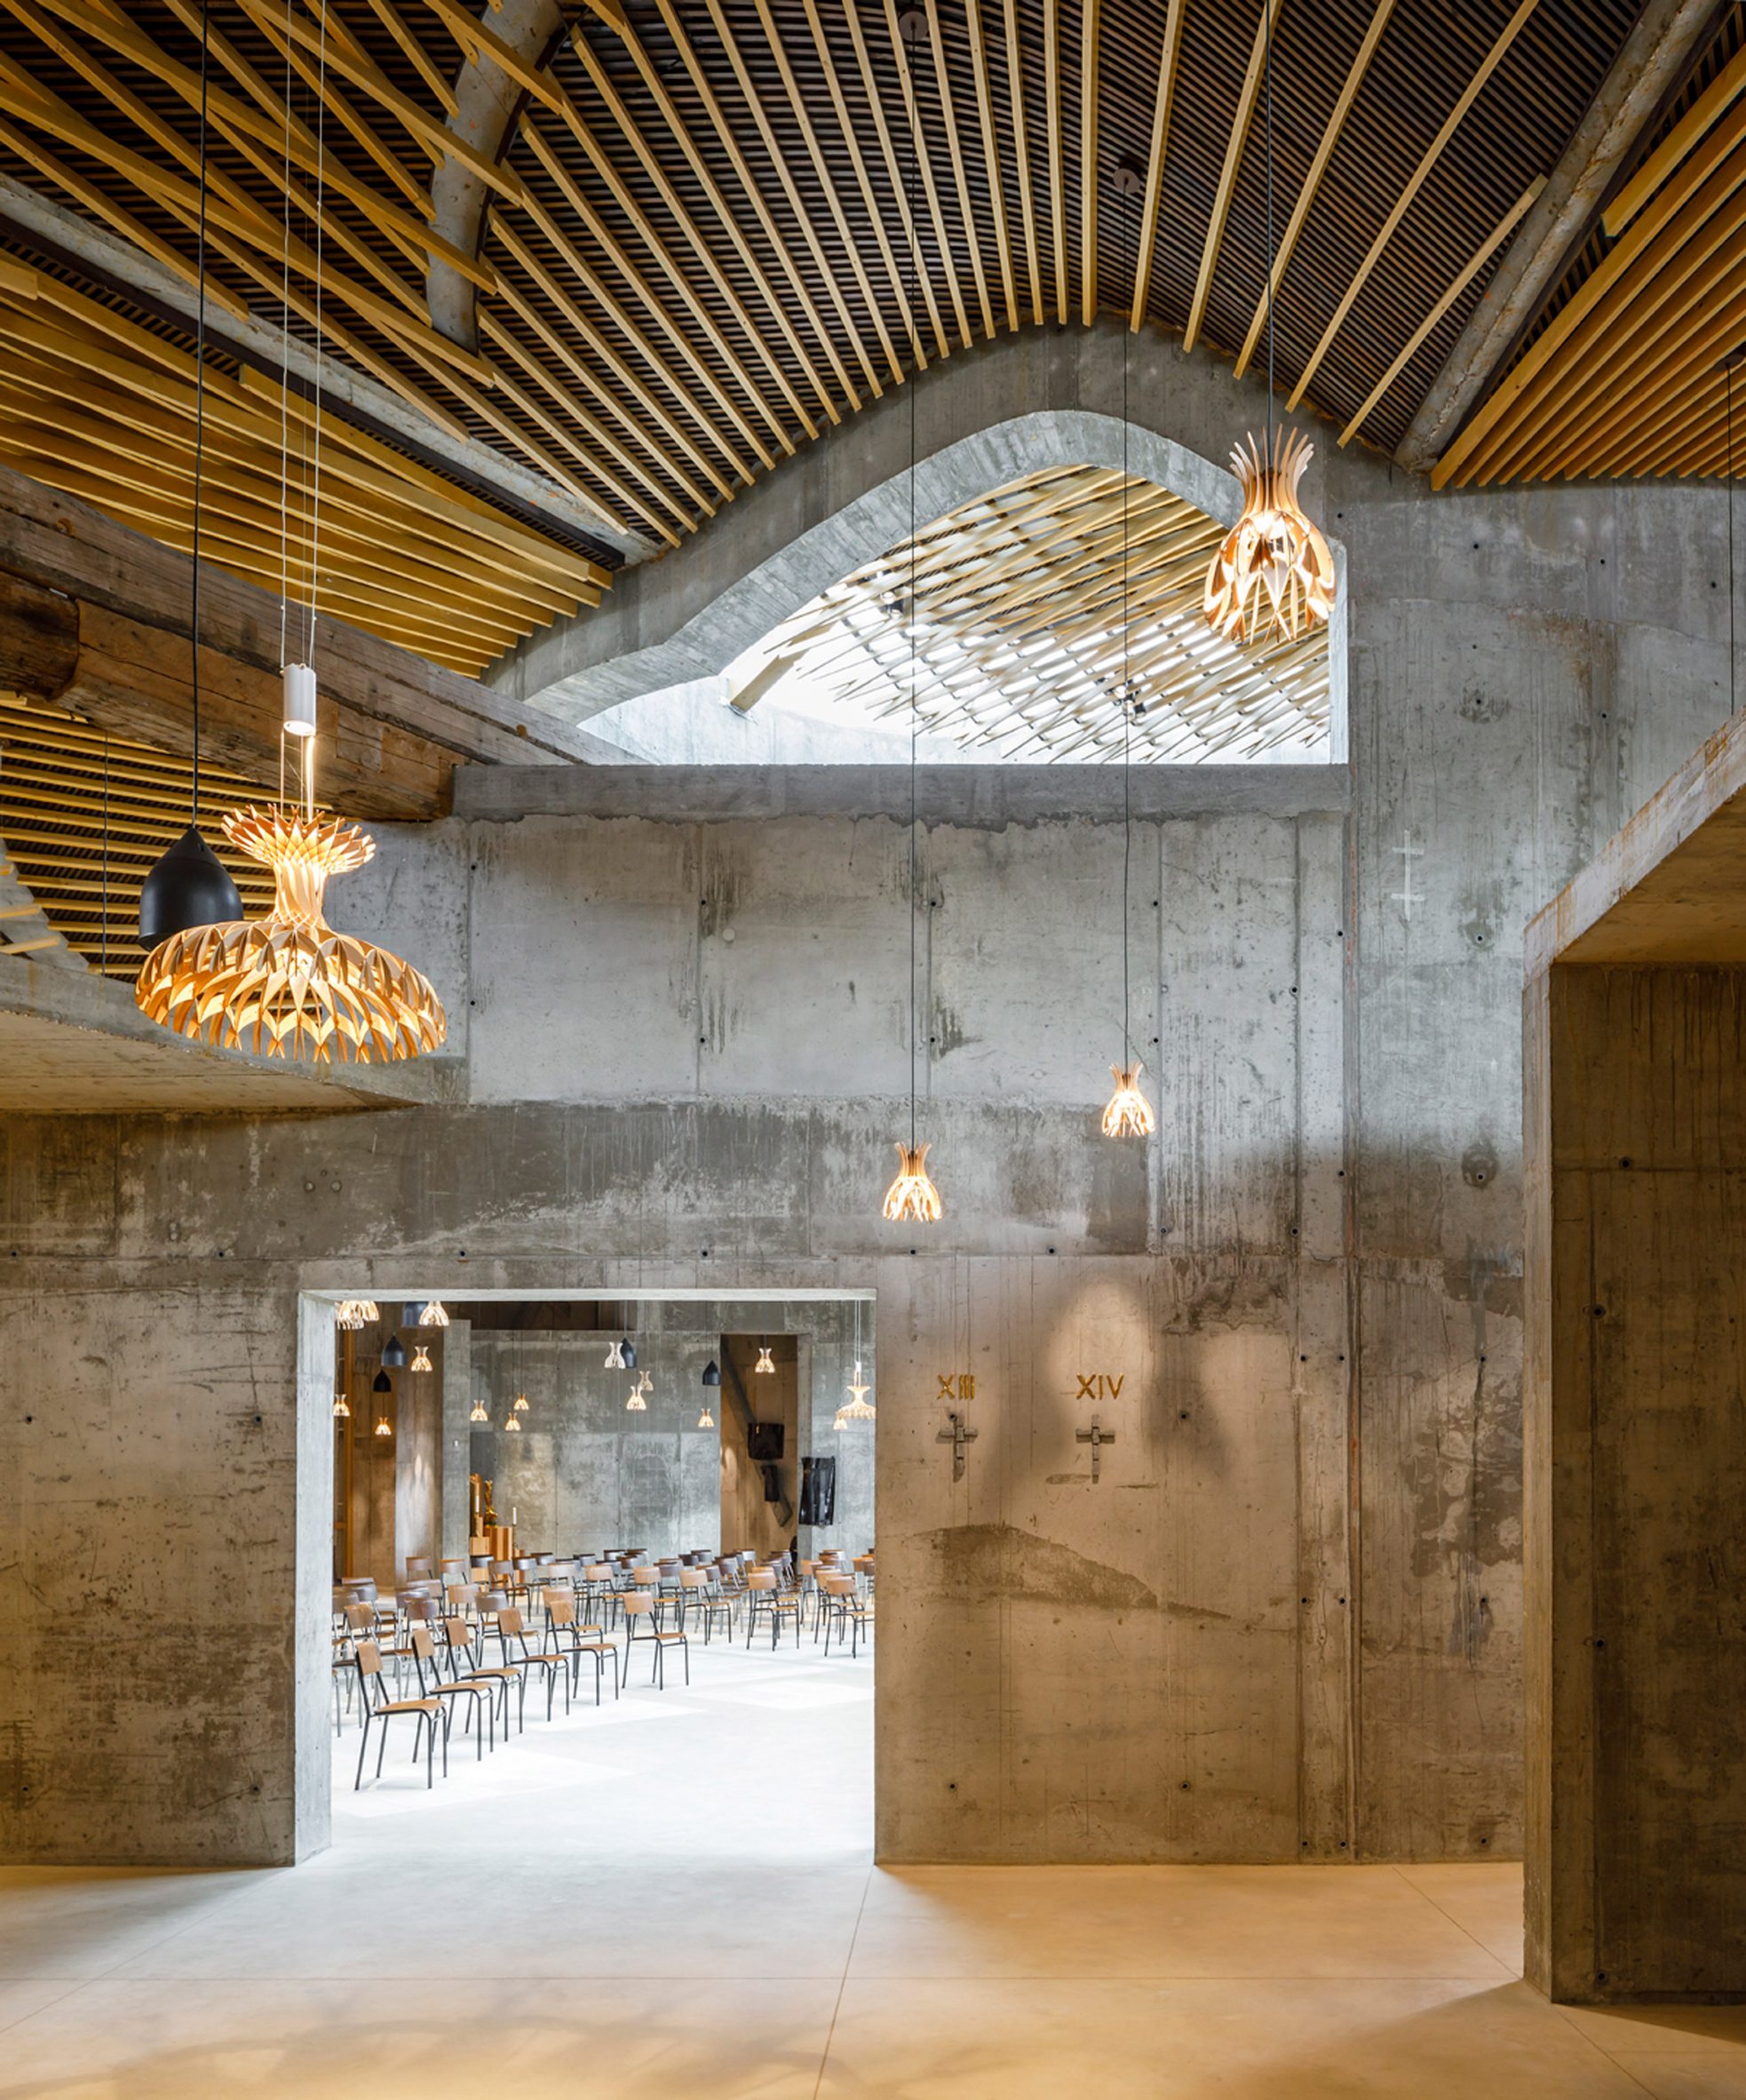 Concrete walls and wooden ceiling in Italian church